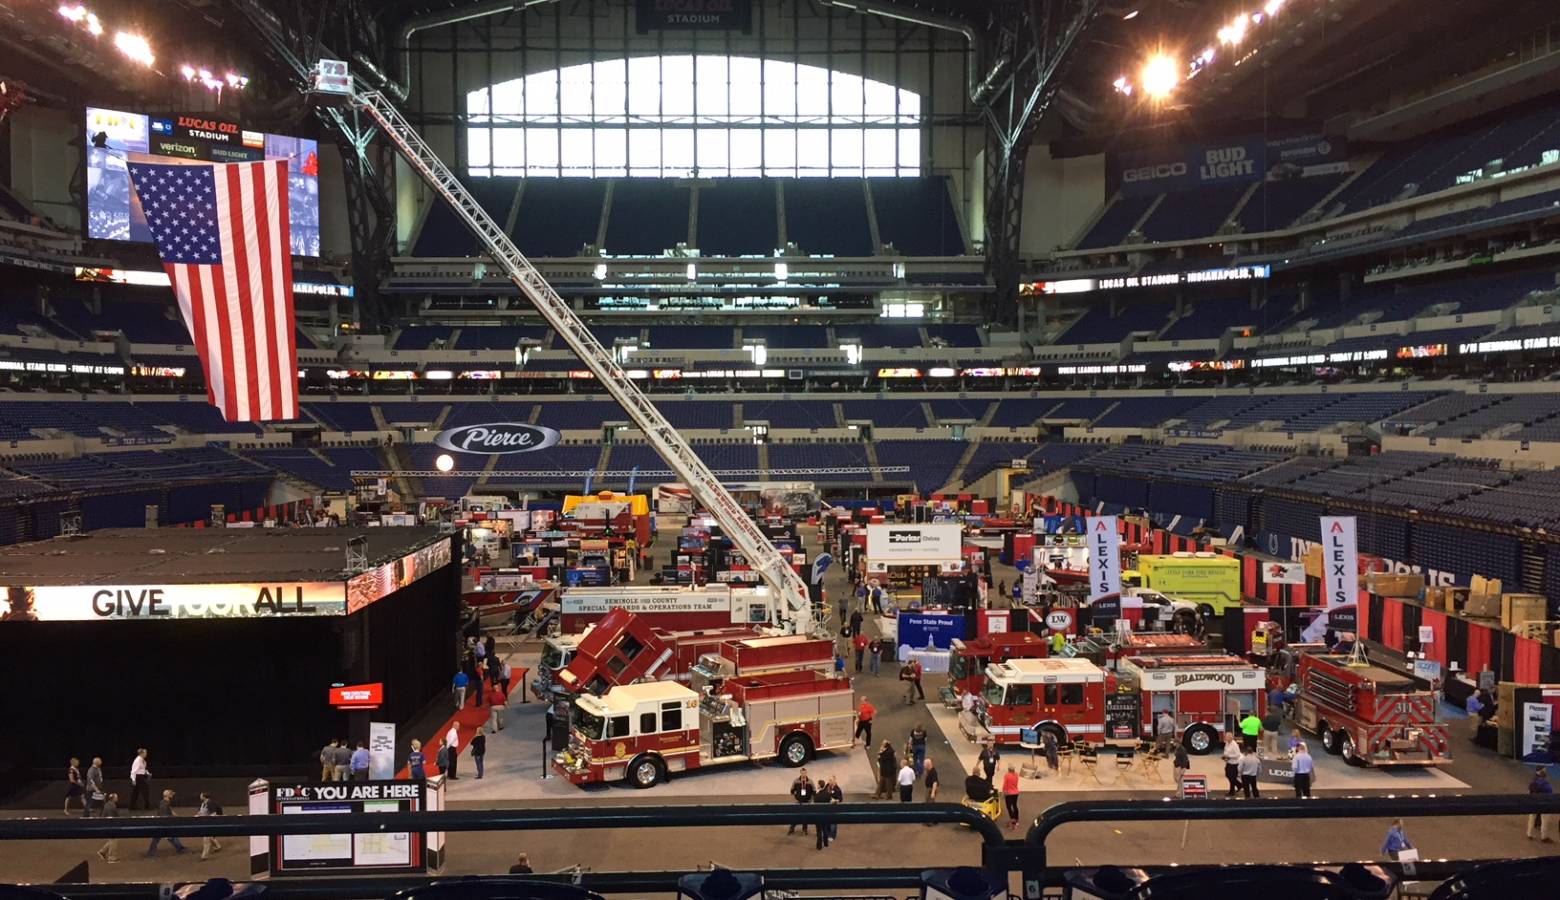 FACEs and LAM are exhibitors at the annual firefighters conference in Indianapolis. (Jill Sheridan/IPB News)